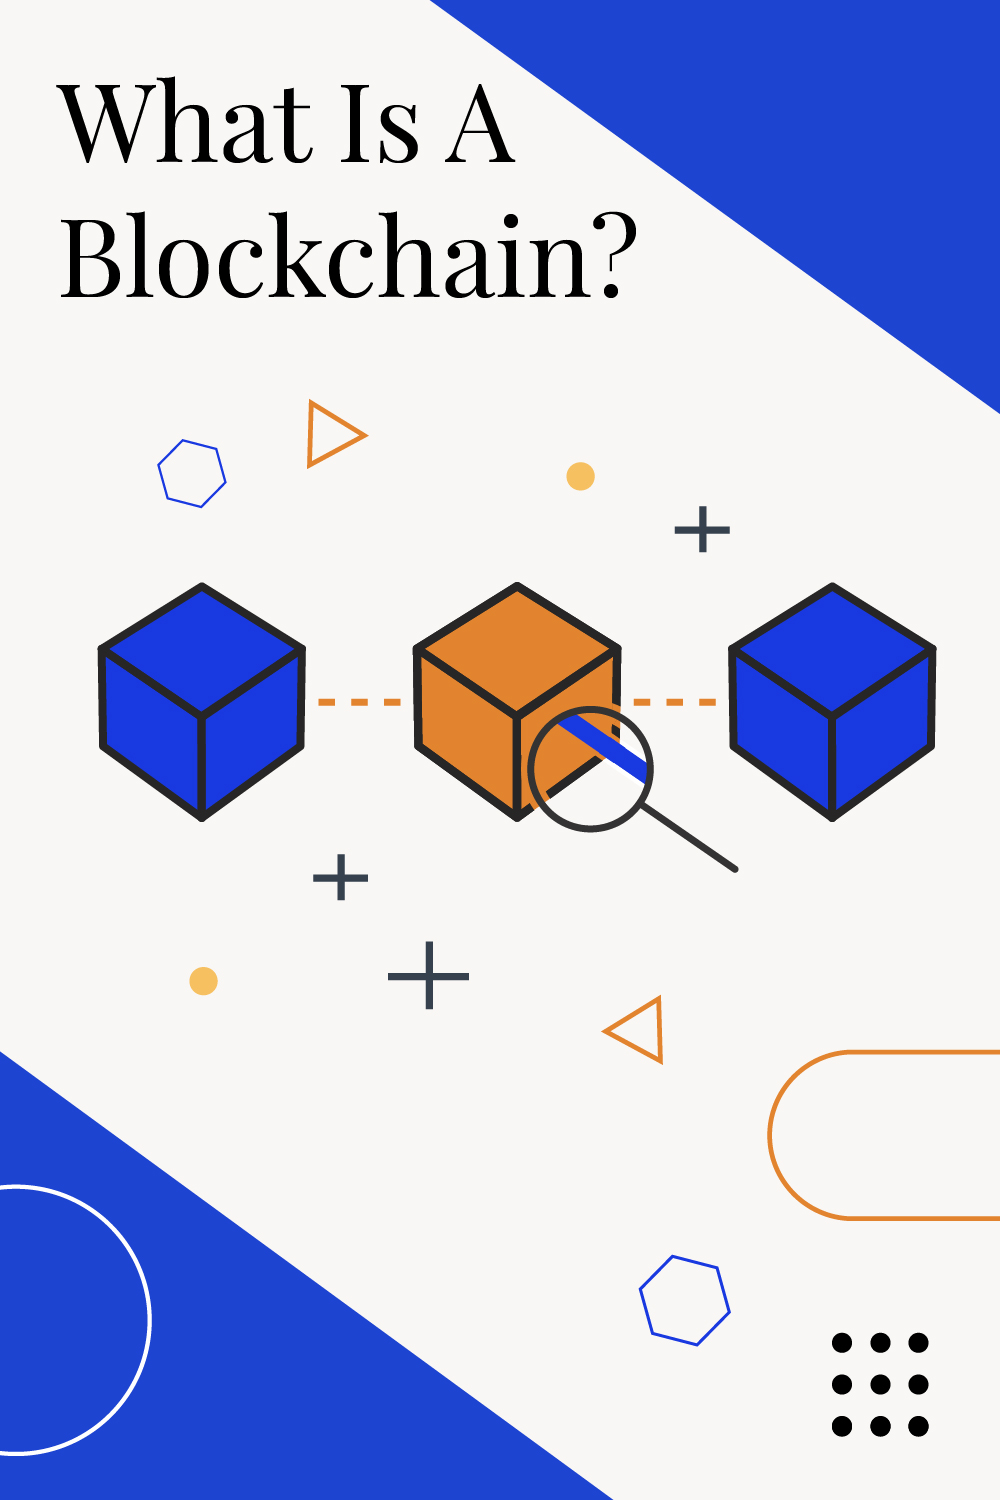 What Is A Blockchain & How Does It Work?